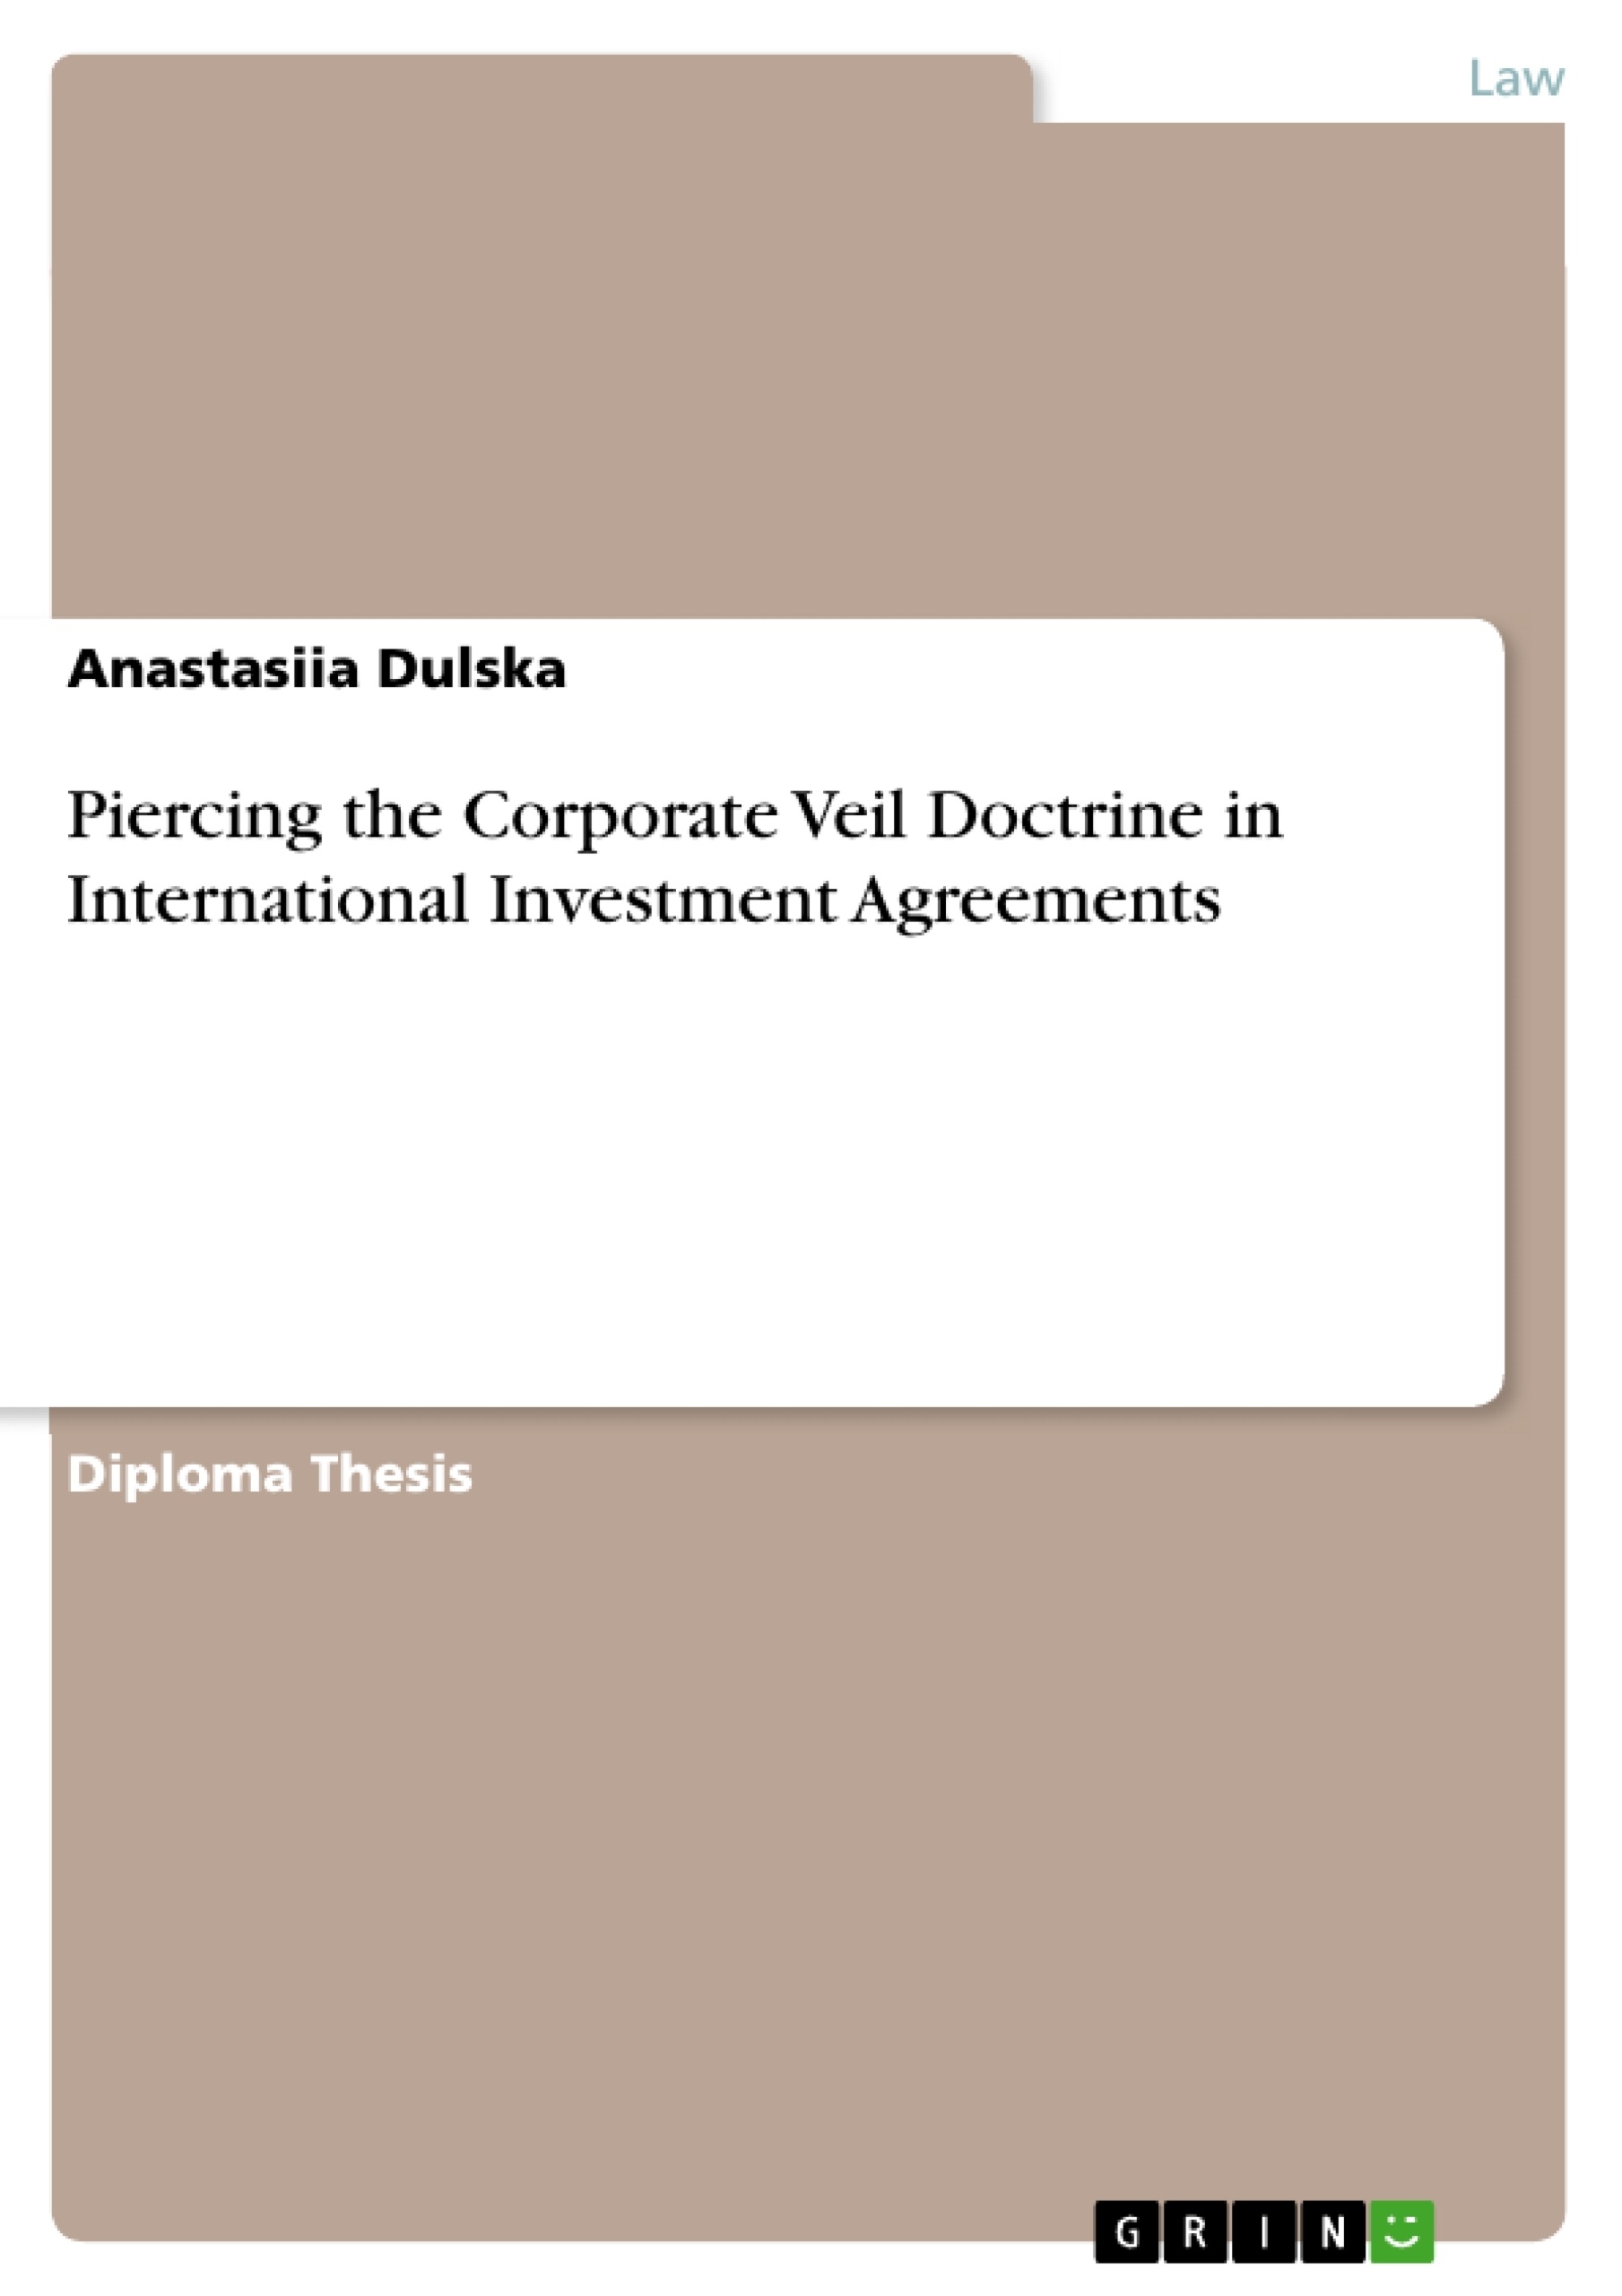 Title: Piercing the Corporate Veil Doctrine in International Investment Agreements